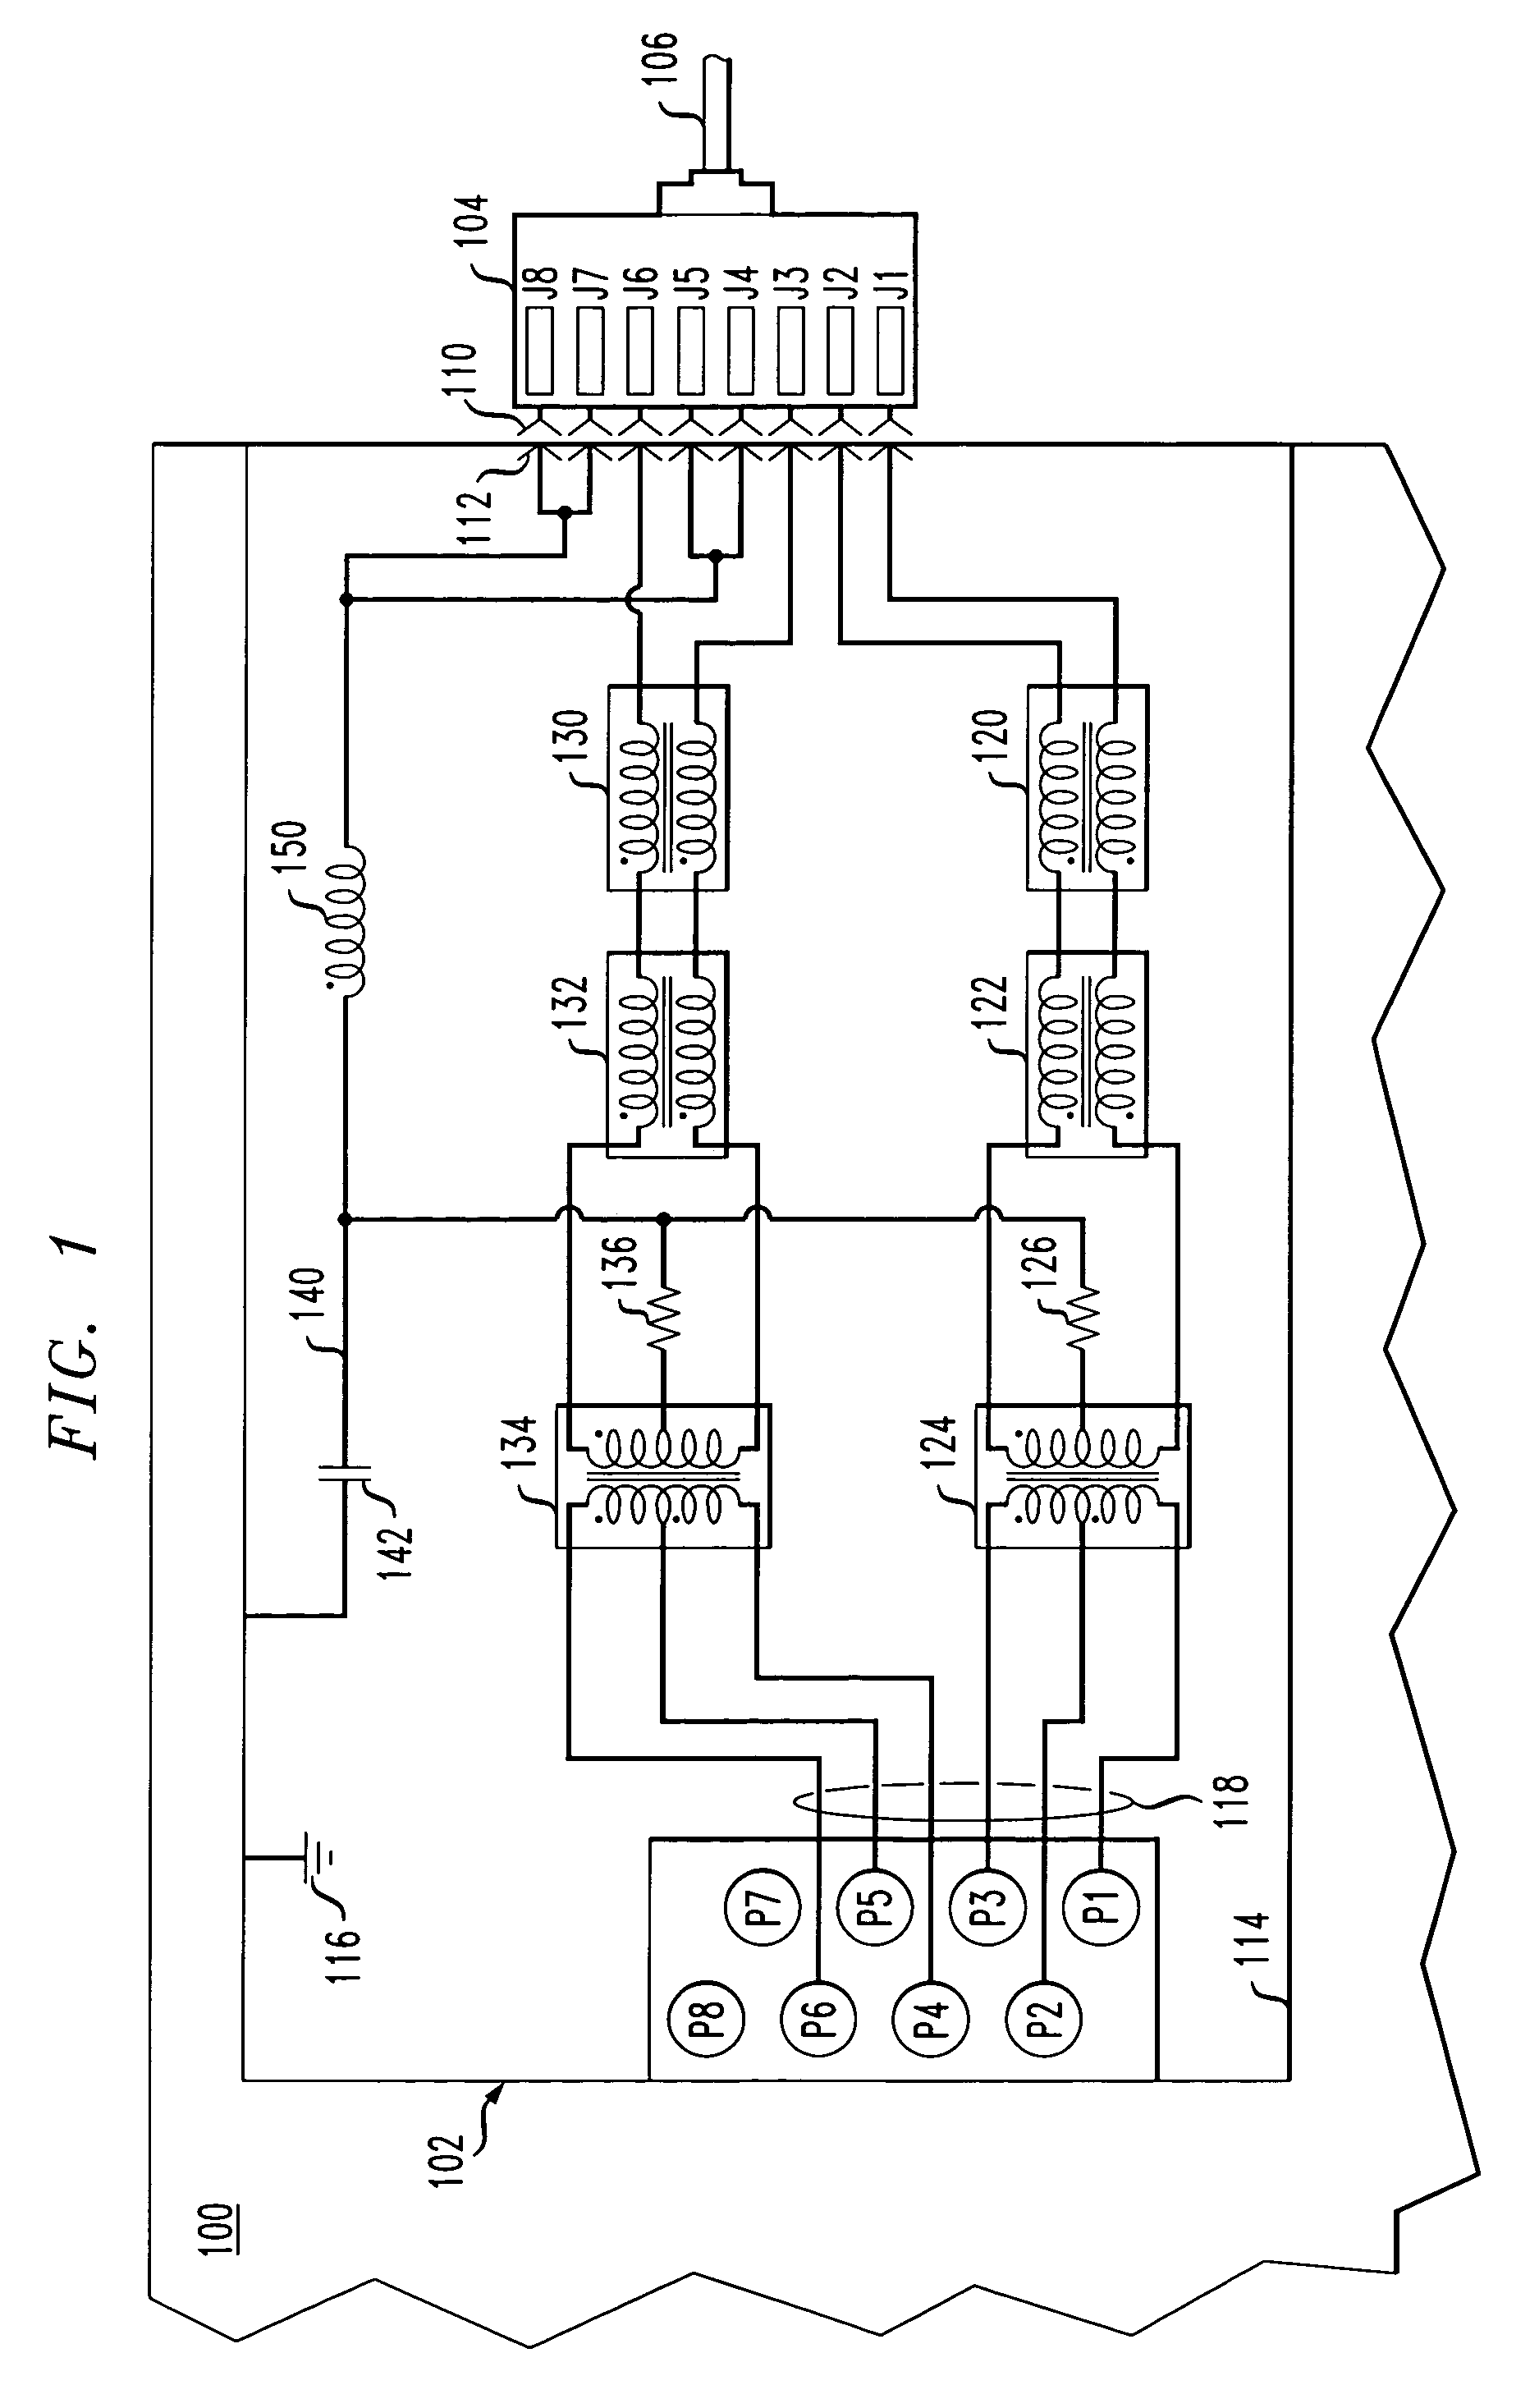 Modular connector with suppression of conducted and radiated emissions